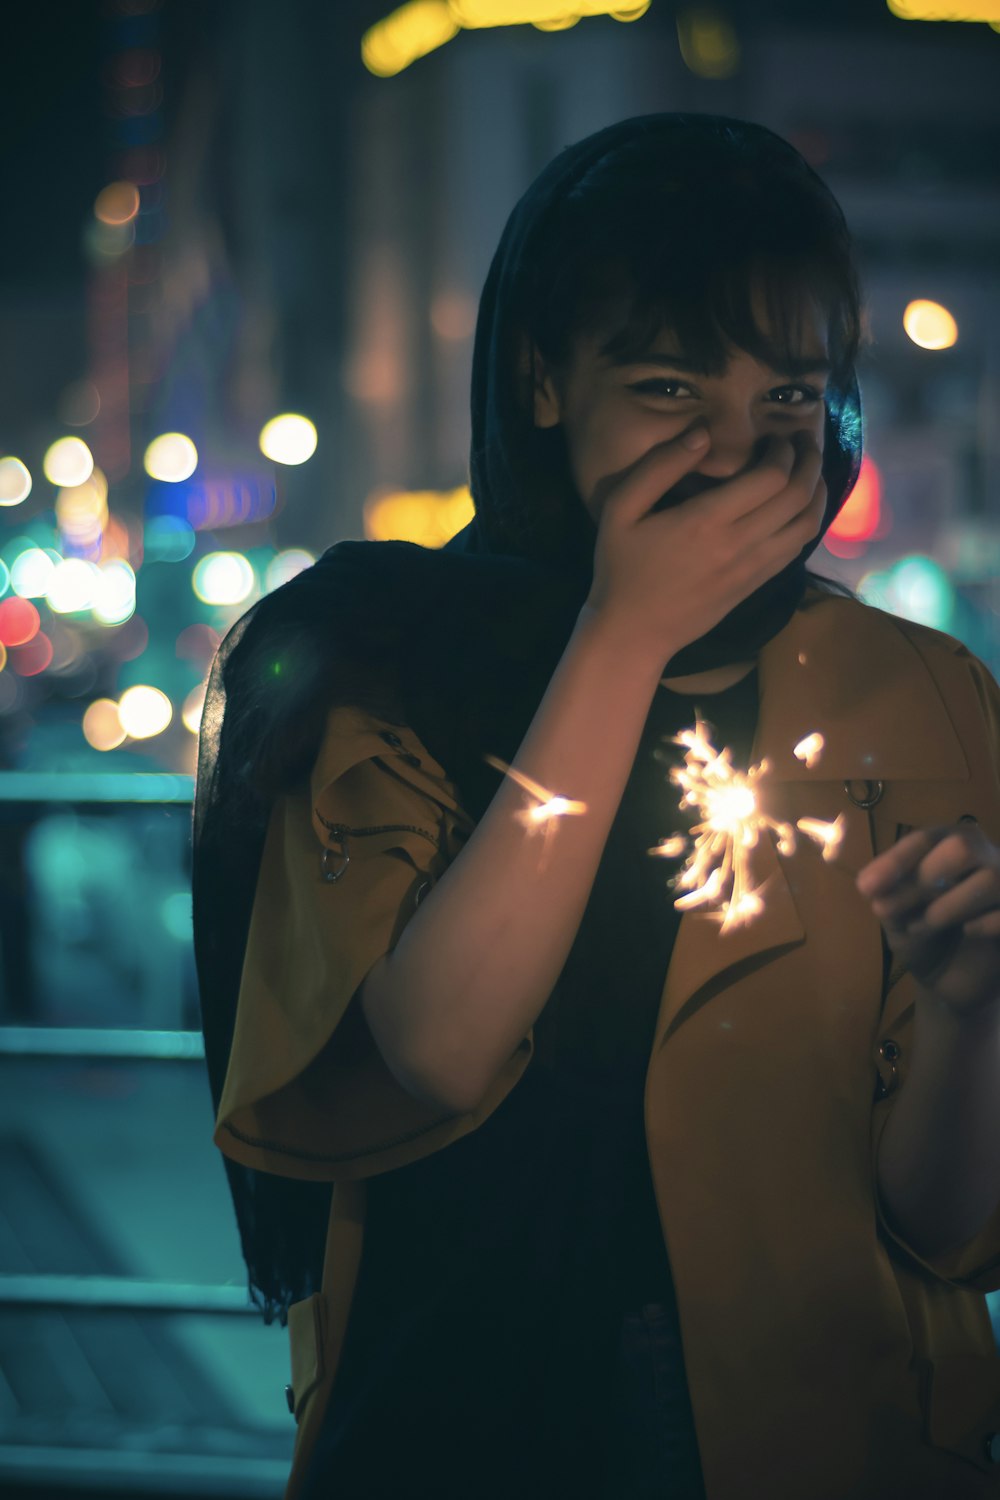 woman in black hijab holding lighted sparkler